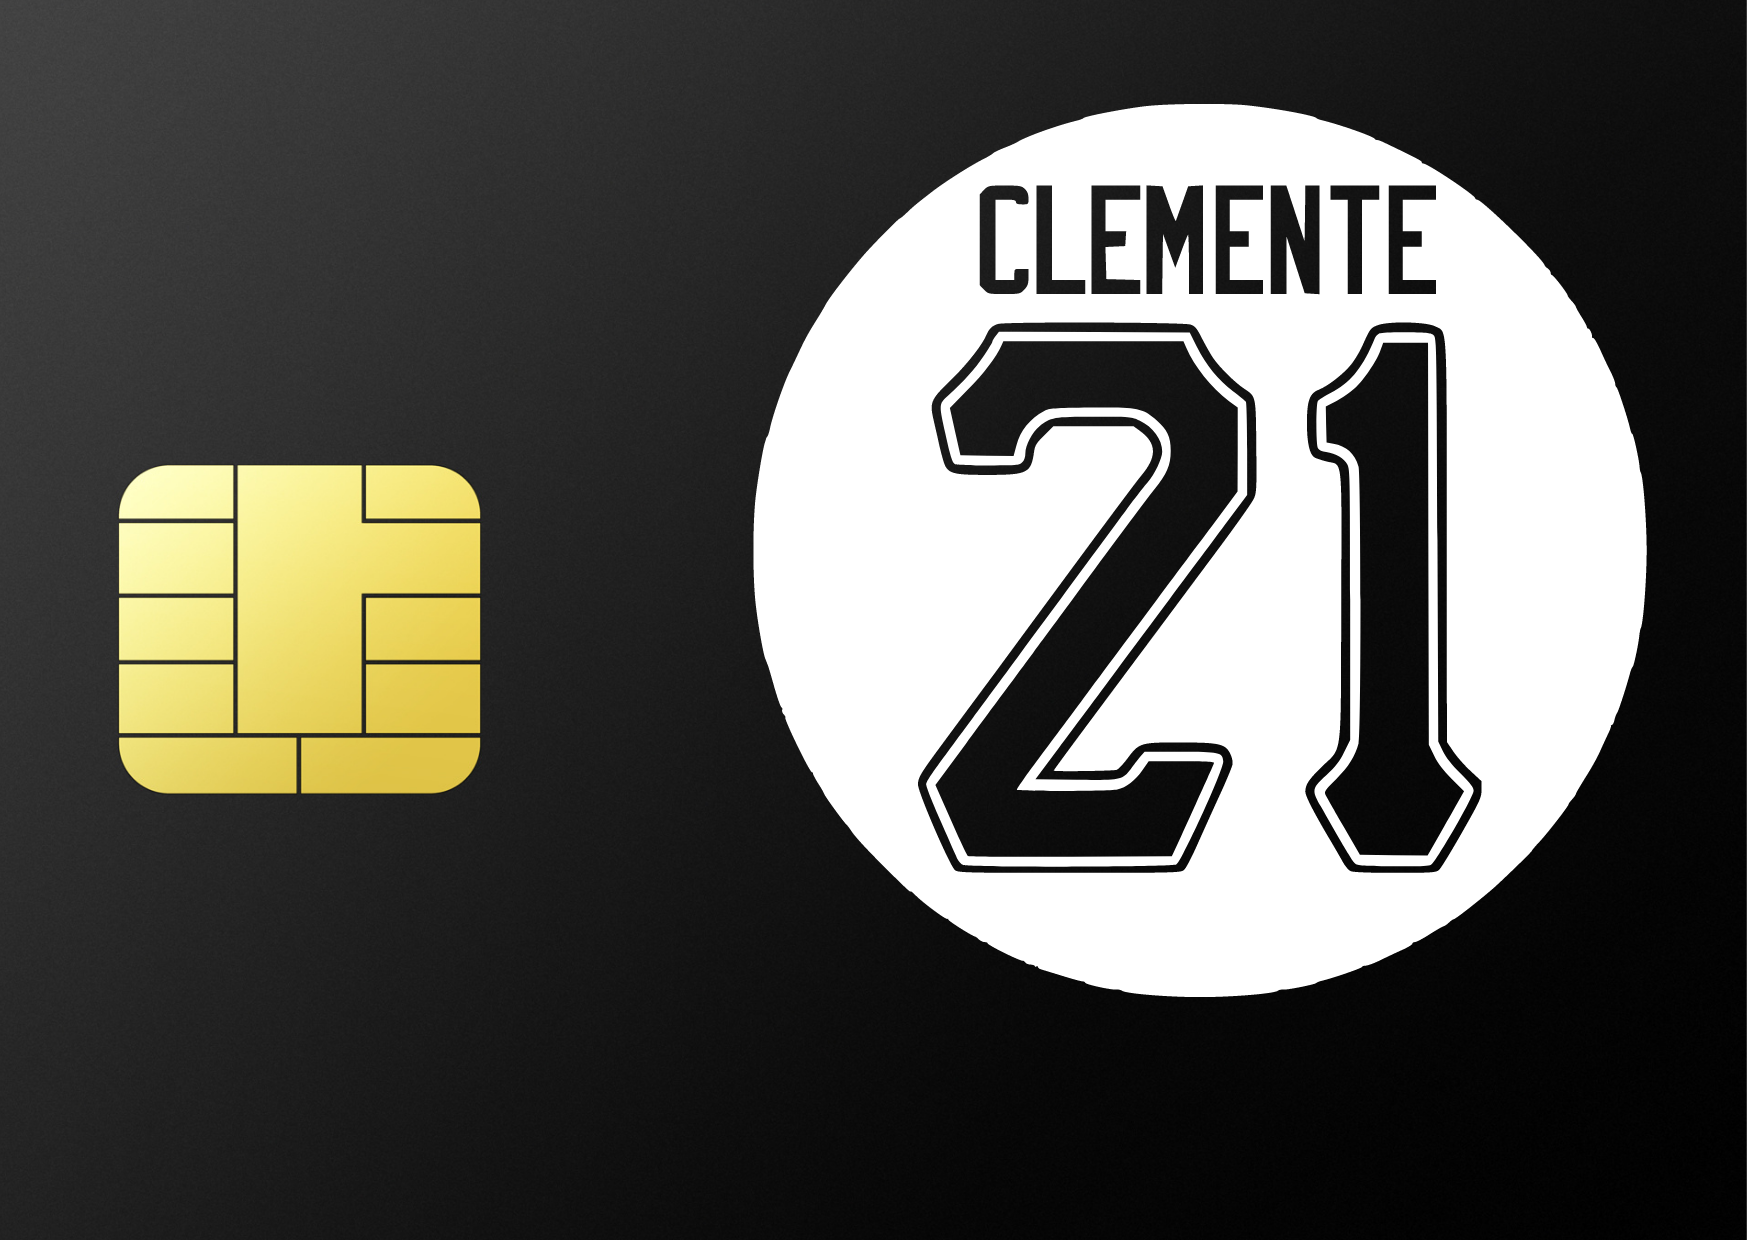 Clemente 21 – LOVE CREATING